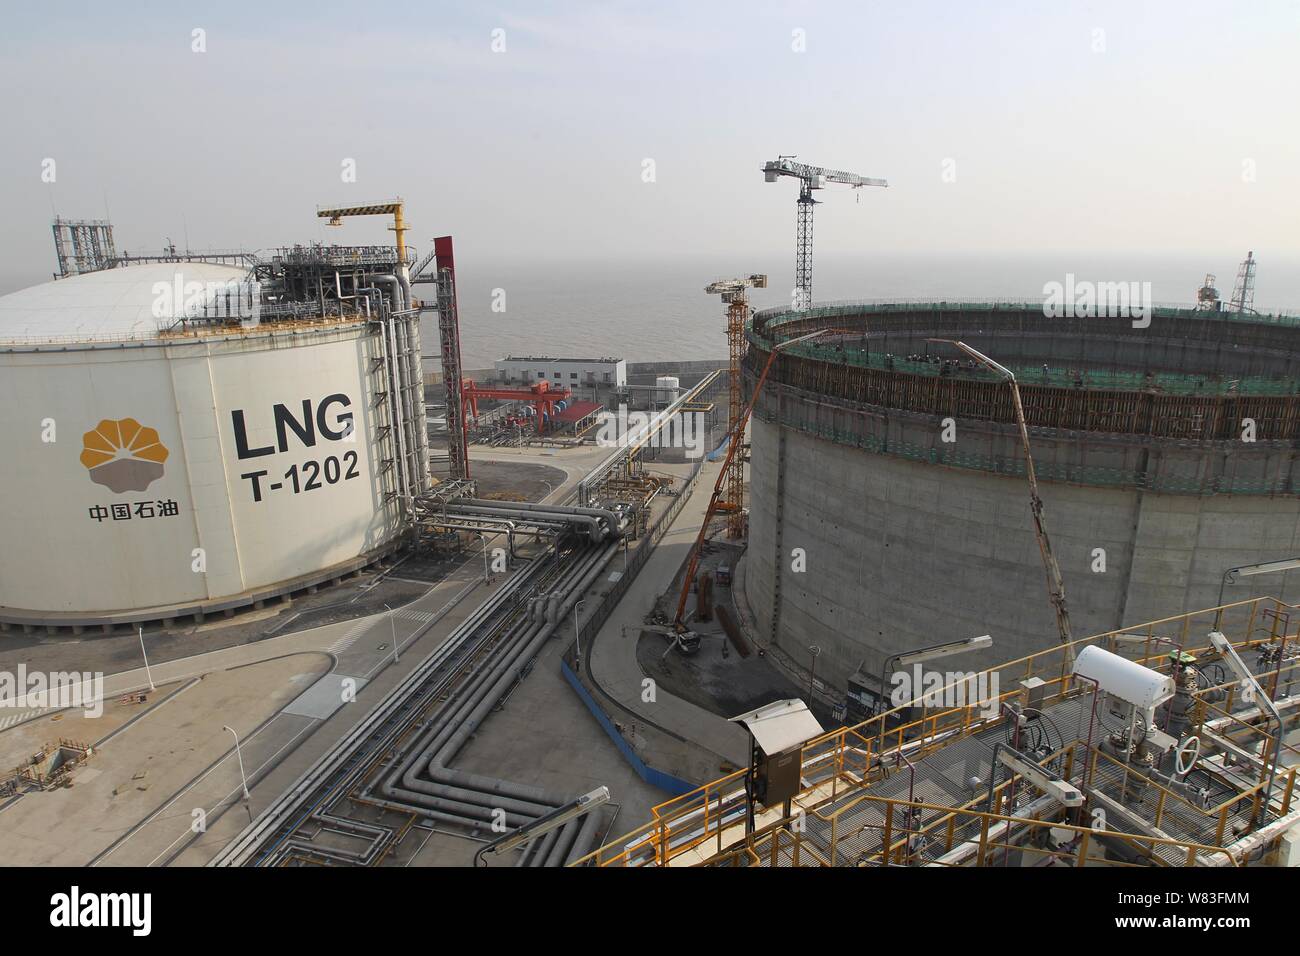 --FILE--An LNG (liquified natural gas) container of CNPC (China National Petroleum Corporation) is under construction next to others at the Yangkou Po Stock Photo